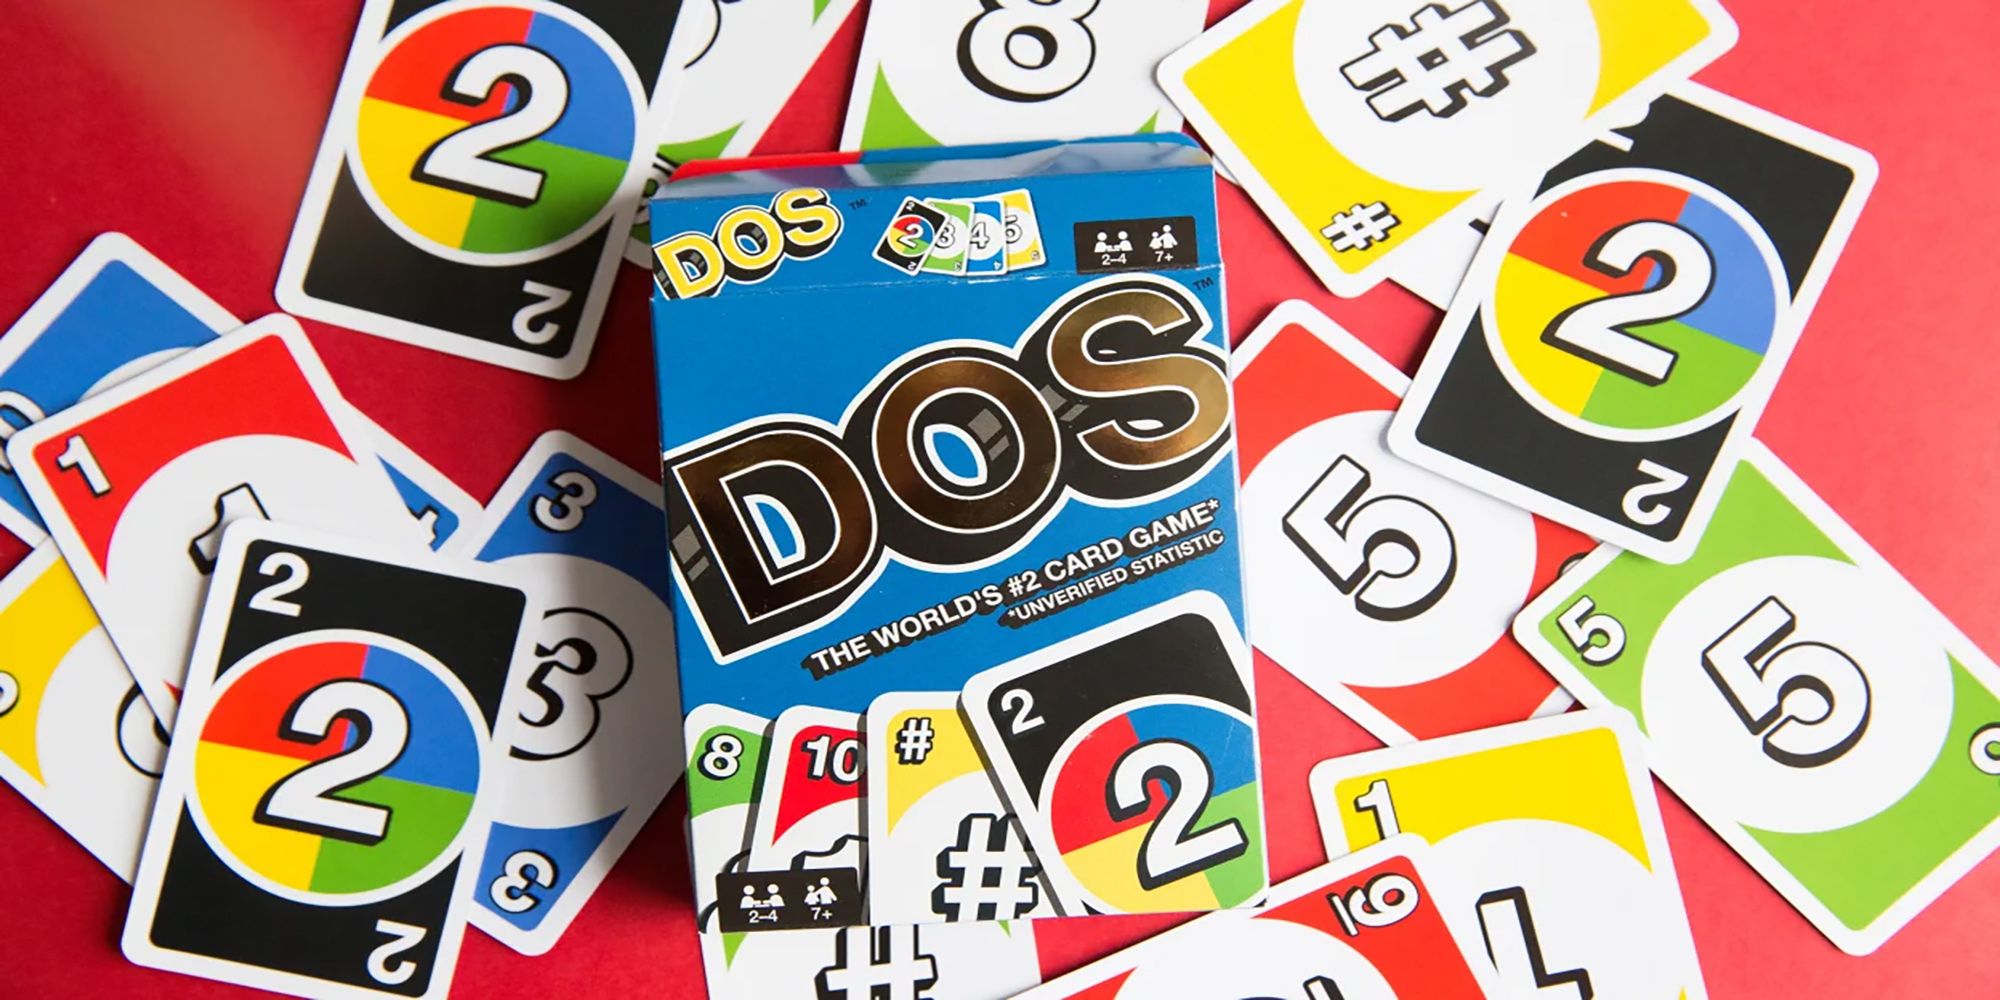 A DOS card game set sits on a red table with several colorful cards with numbers and symbols on them.